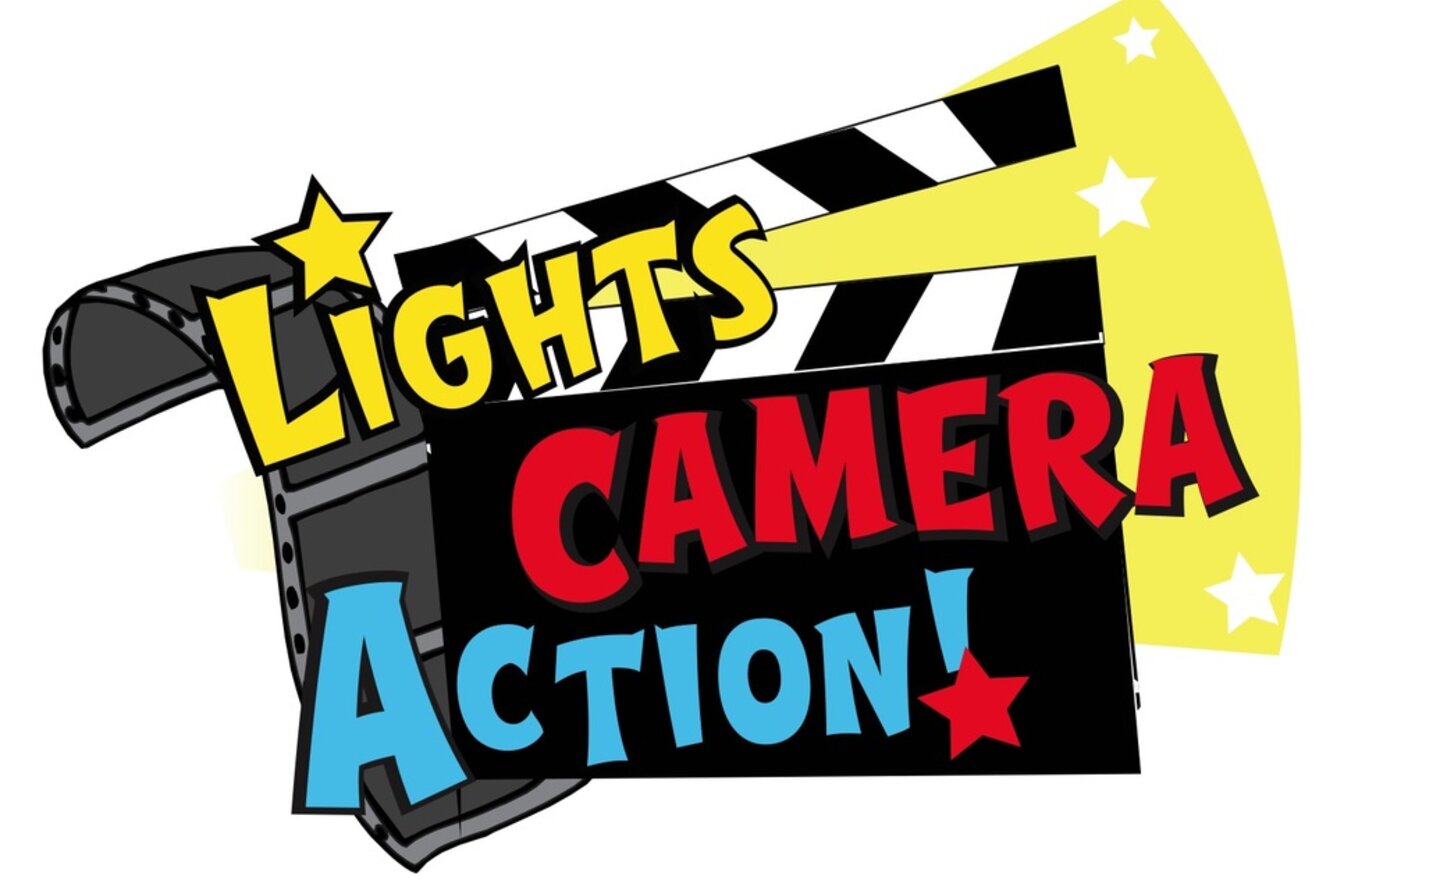 Image of Lights, camera, action!